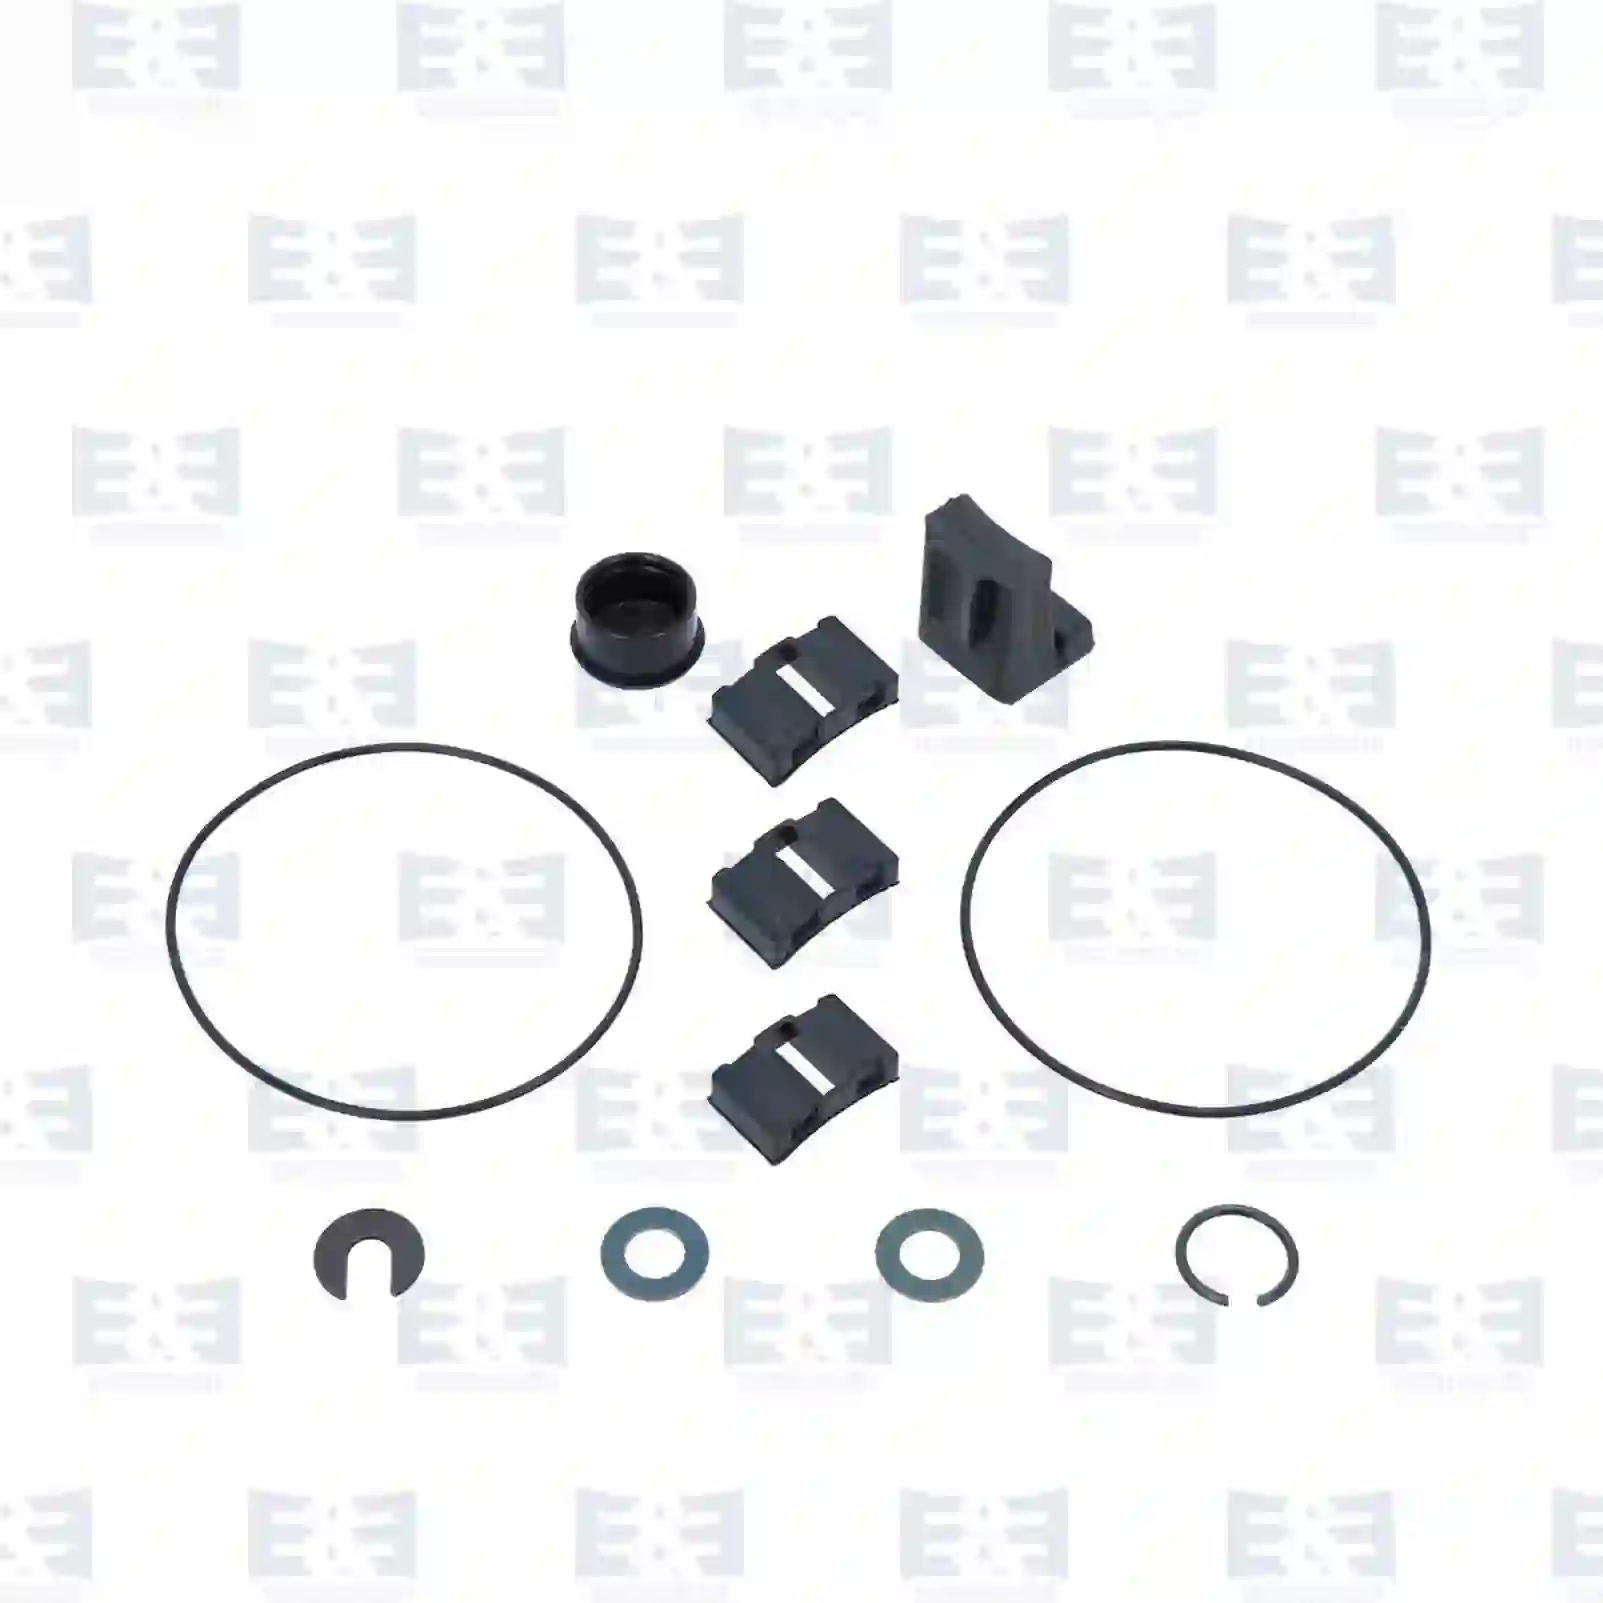 Repair kit, starter, 2E2297695, 1658745, 51916076000, 1447911S2, 1570898S2, 1571467S2, 1796026S2, 2029376S2, 2031368S2, 2276131S2, 570898S2, 571467S2, 579265S2, 579271S2 ||  2E2297695 E&E Truck Spare Parts | Truck Spare Parts, Auotomotive Spare Parts Repair kit, starter, 2E2297695, 1658745, 51916076000, 1447911S2, 1570898S2, 1571467S2, 1796026S2, 2029376S2, 2031368S2, 2276131S2, 570898S2, 571467S2, 579265S2, 579271S2 ||  2E2297695 E&E Truck Spare Parts | Truck Spare Parts, Auotomotive Spare Parts